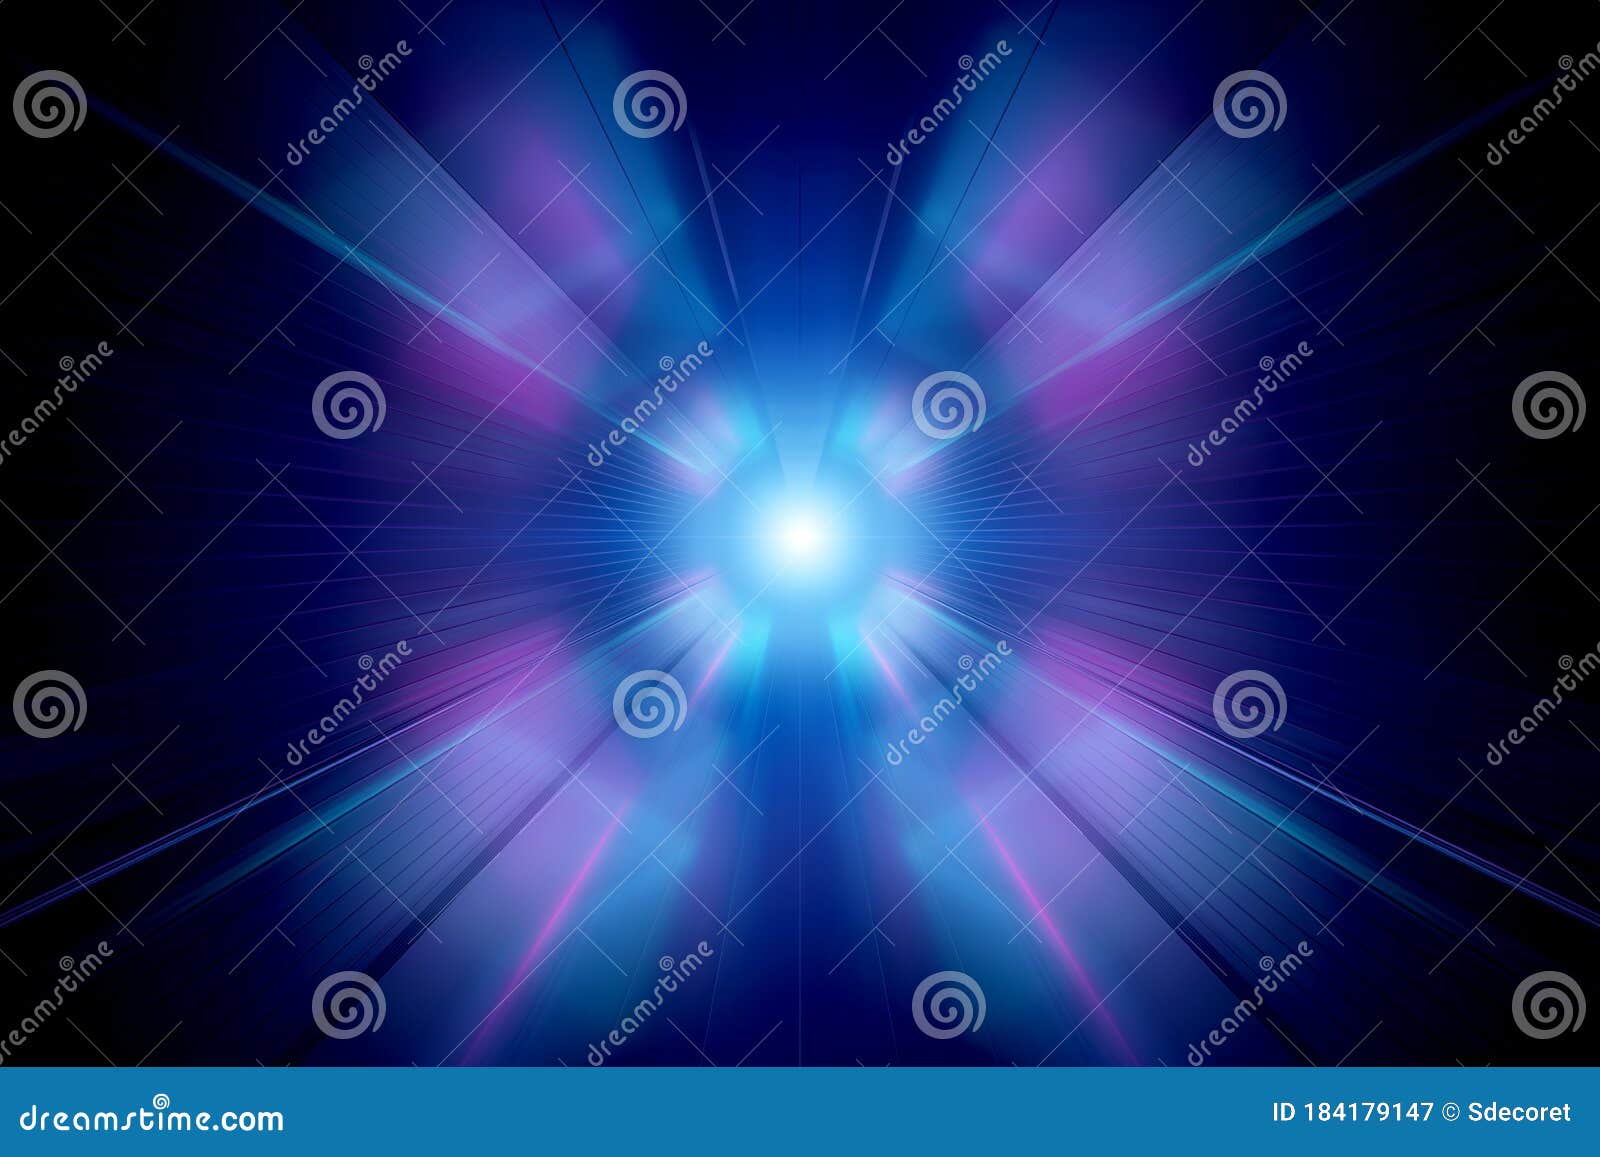 Abstract Zoom Blur Backgroundwallpaper Royalty Free Stock Image